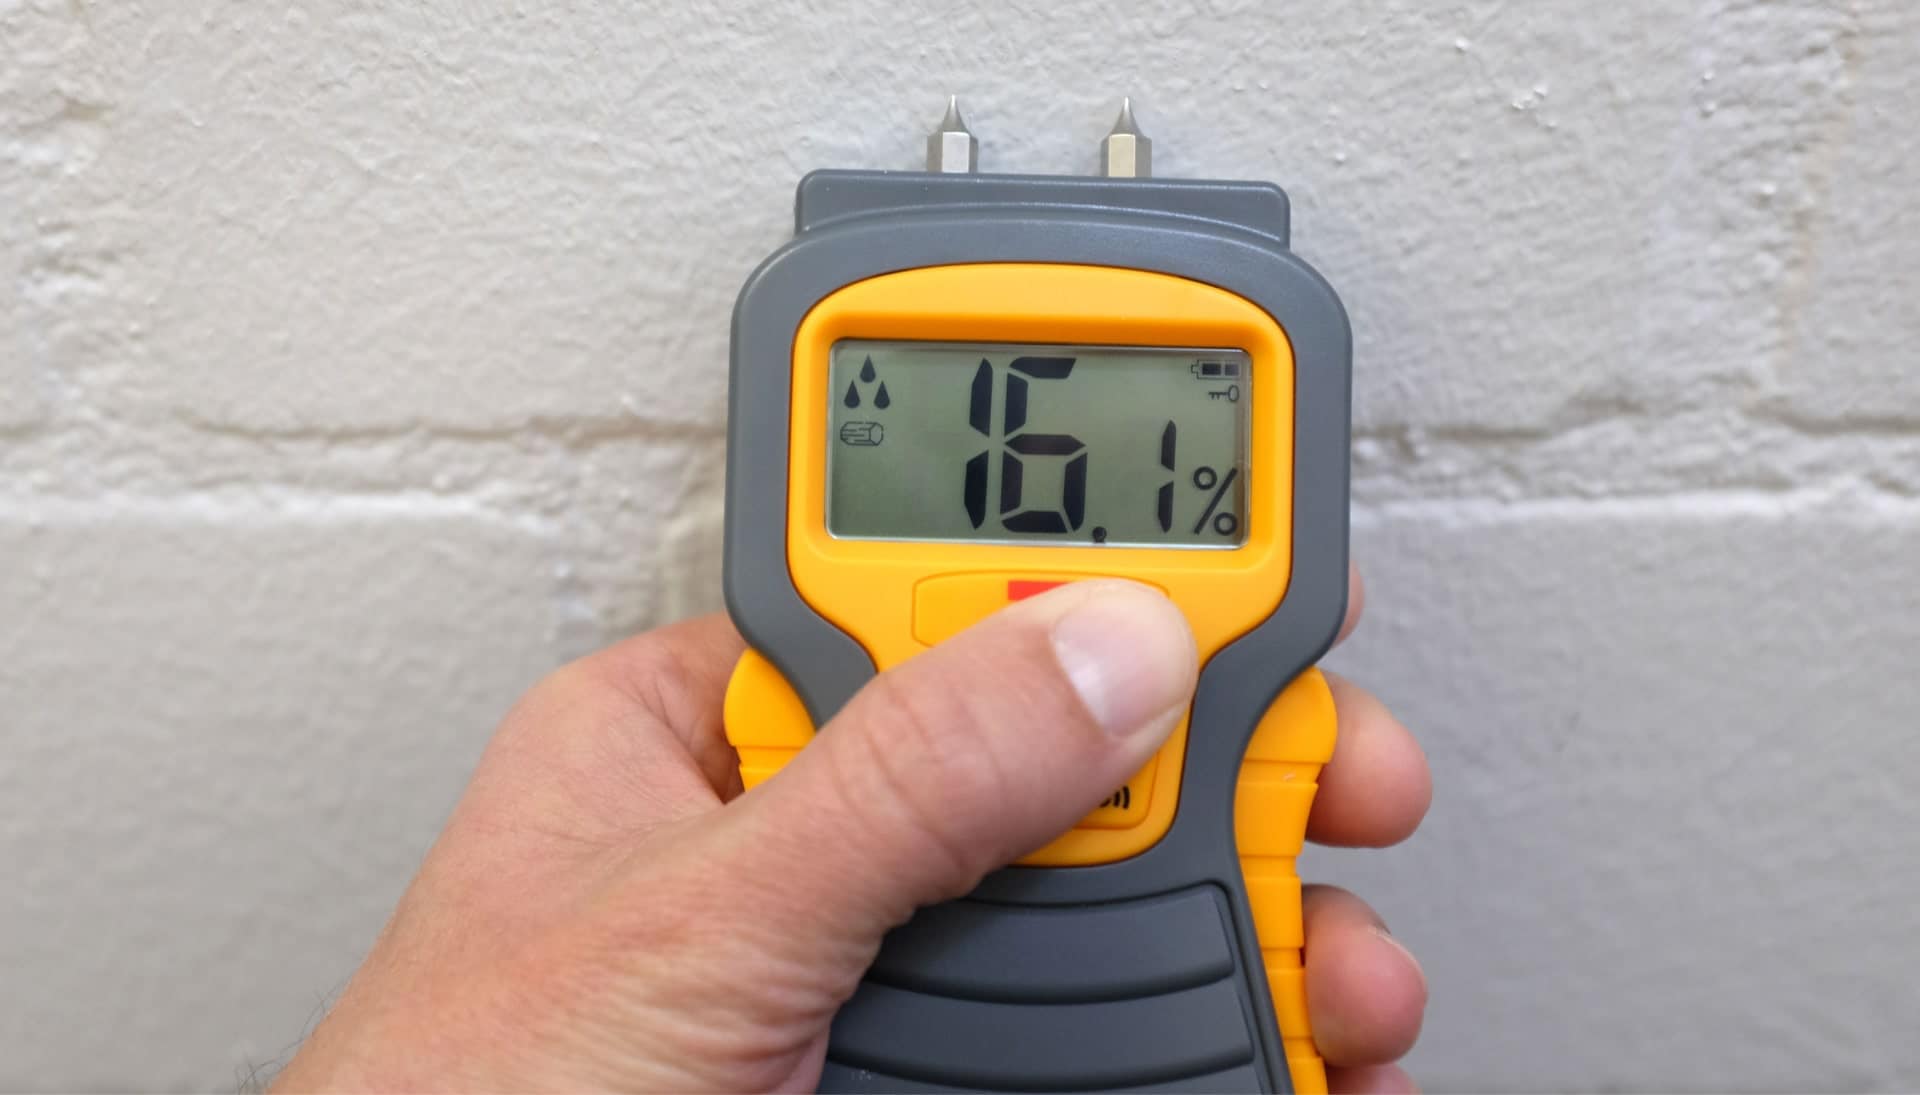 We provide fast, accurate, and affordable mold testing services in Cedar Rapids, Iowa.